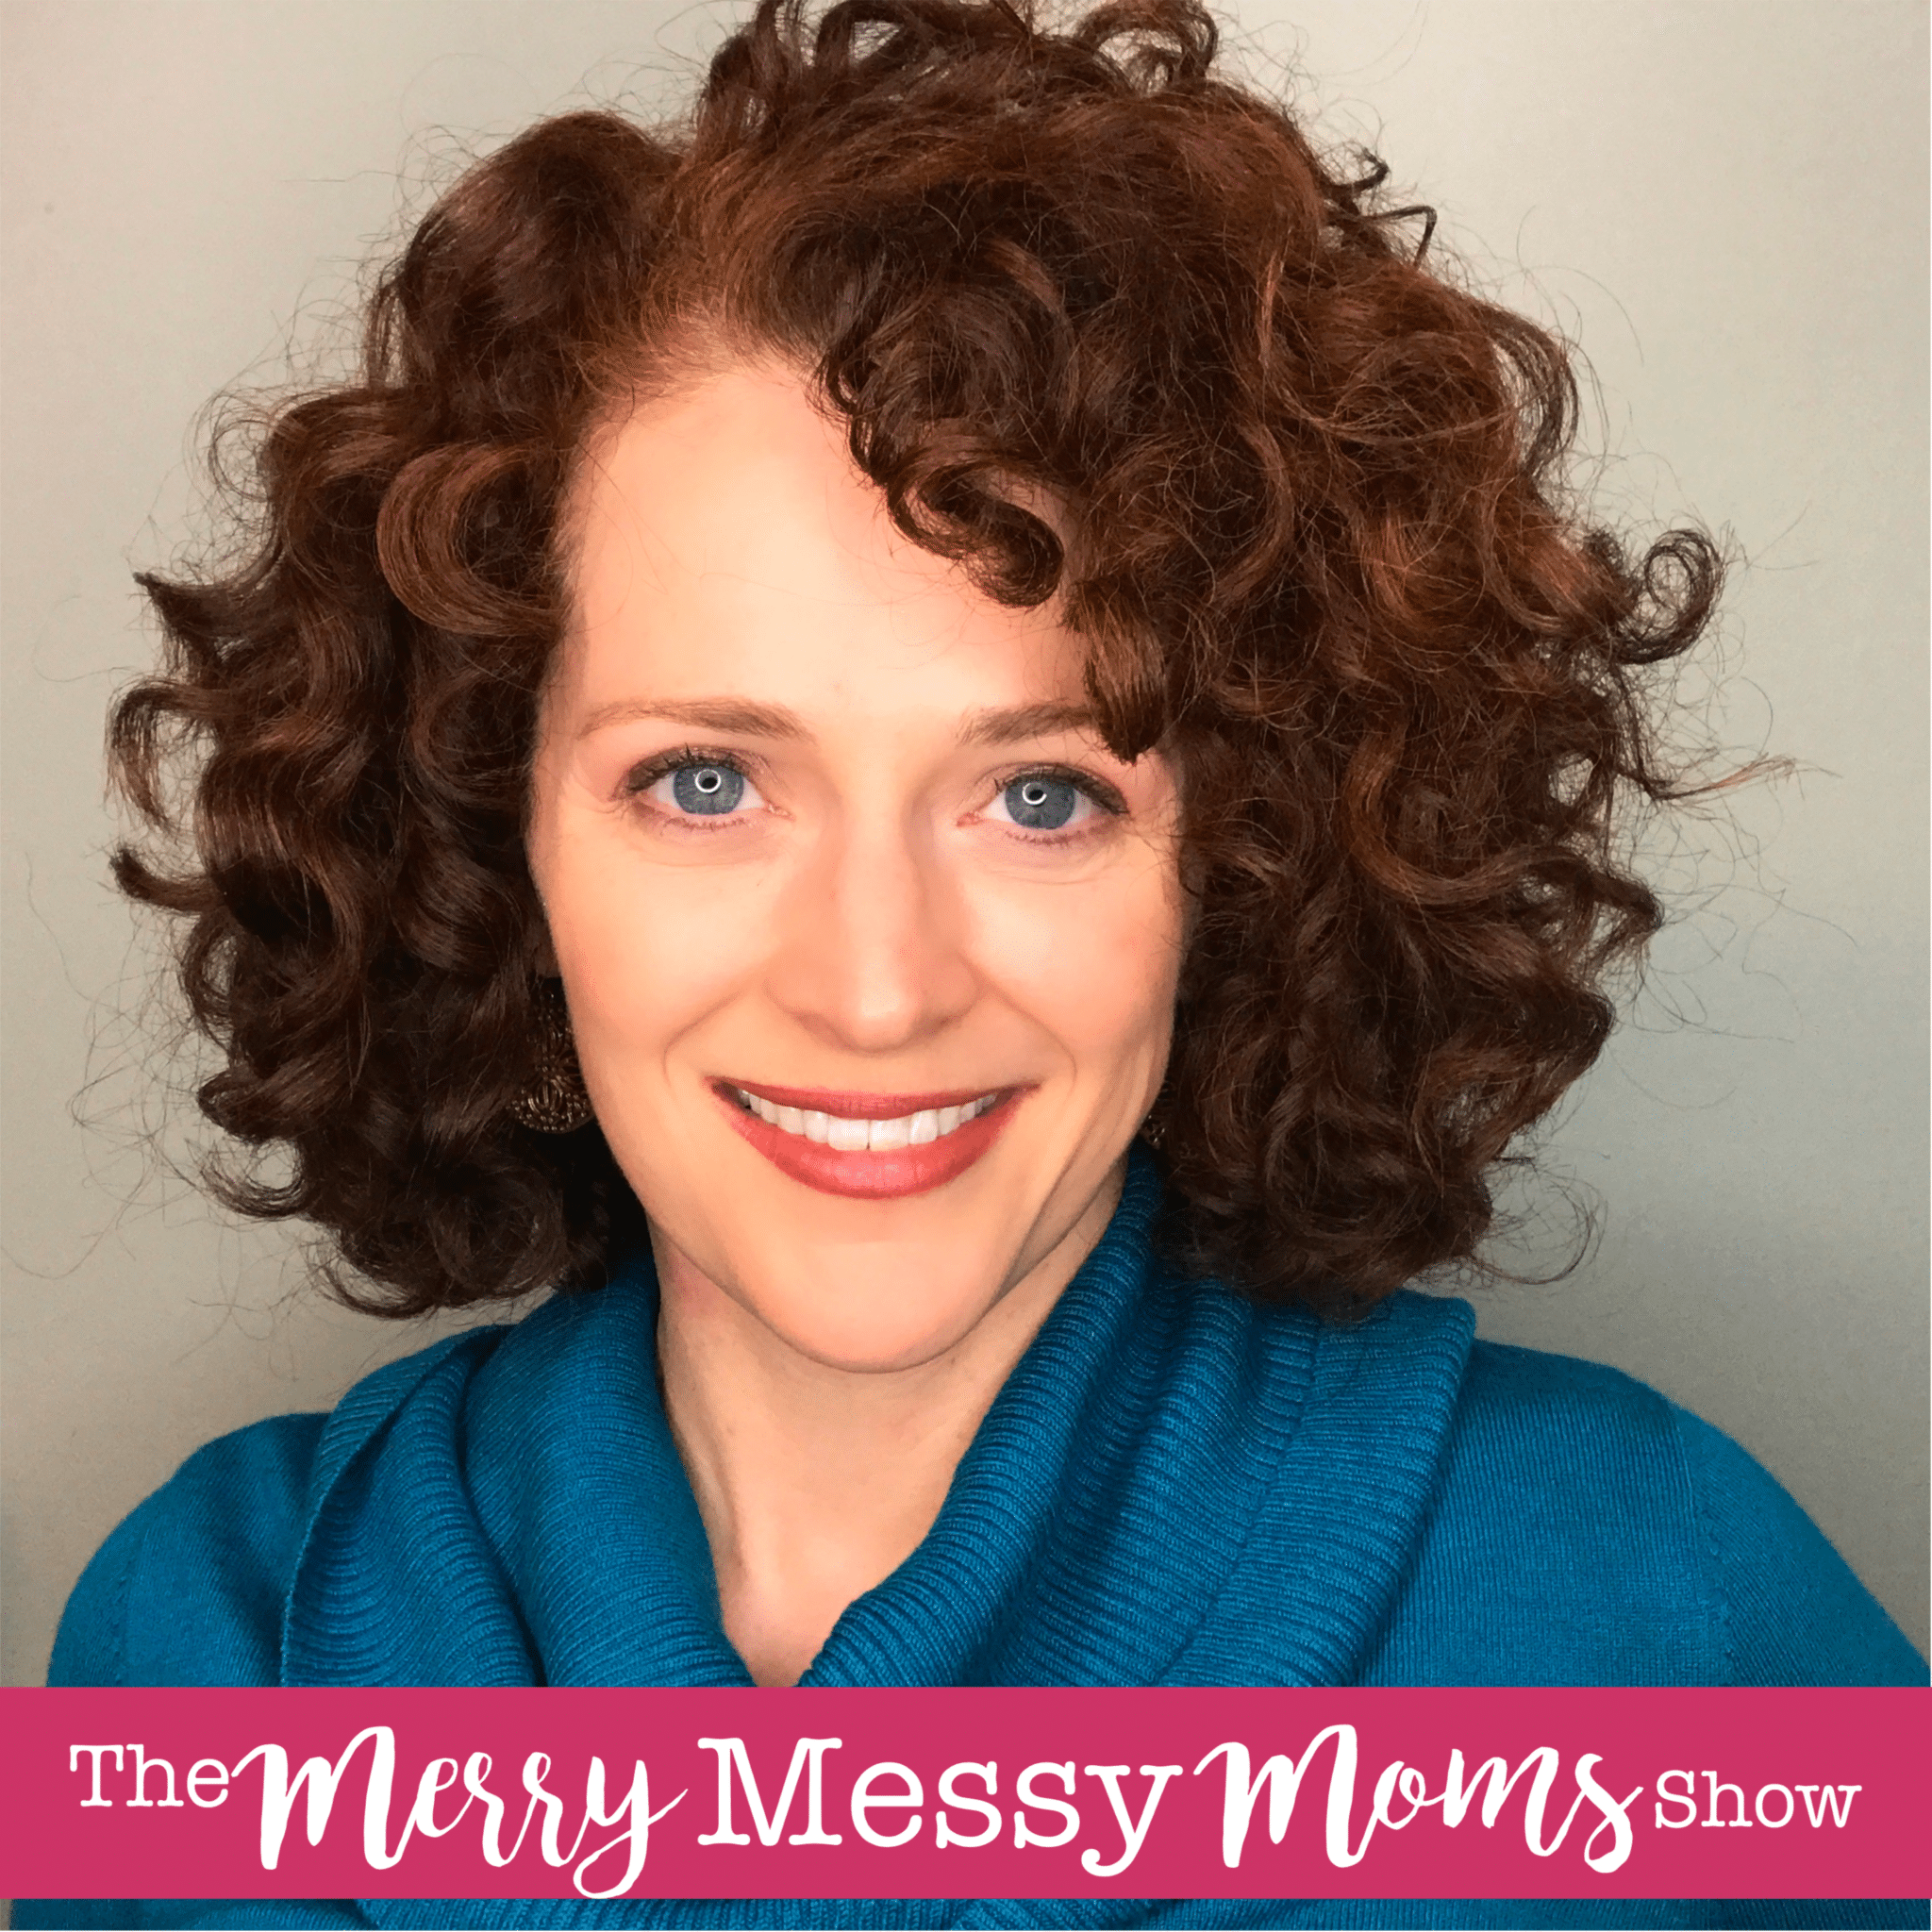 Mom Exercise, How to Fit in it as a Busy Mom, and Actually Stick to It – Episode 7